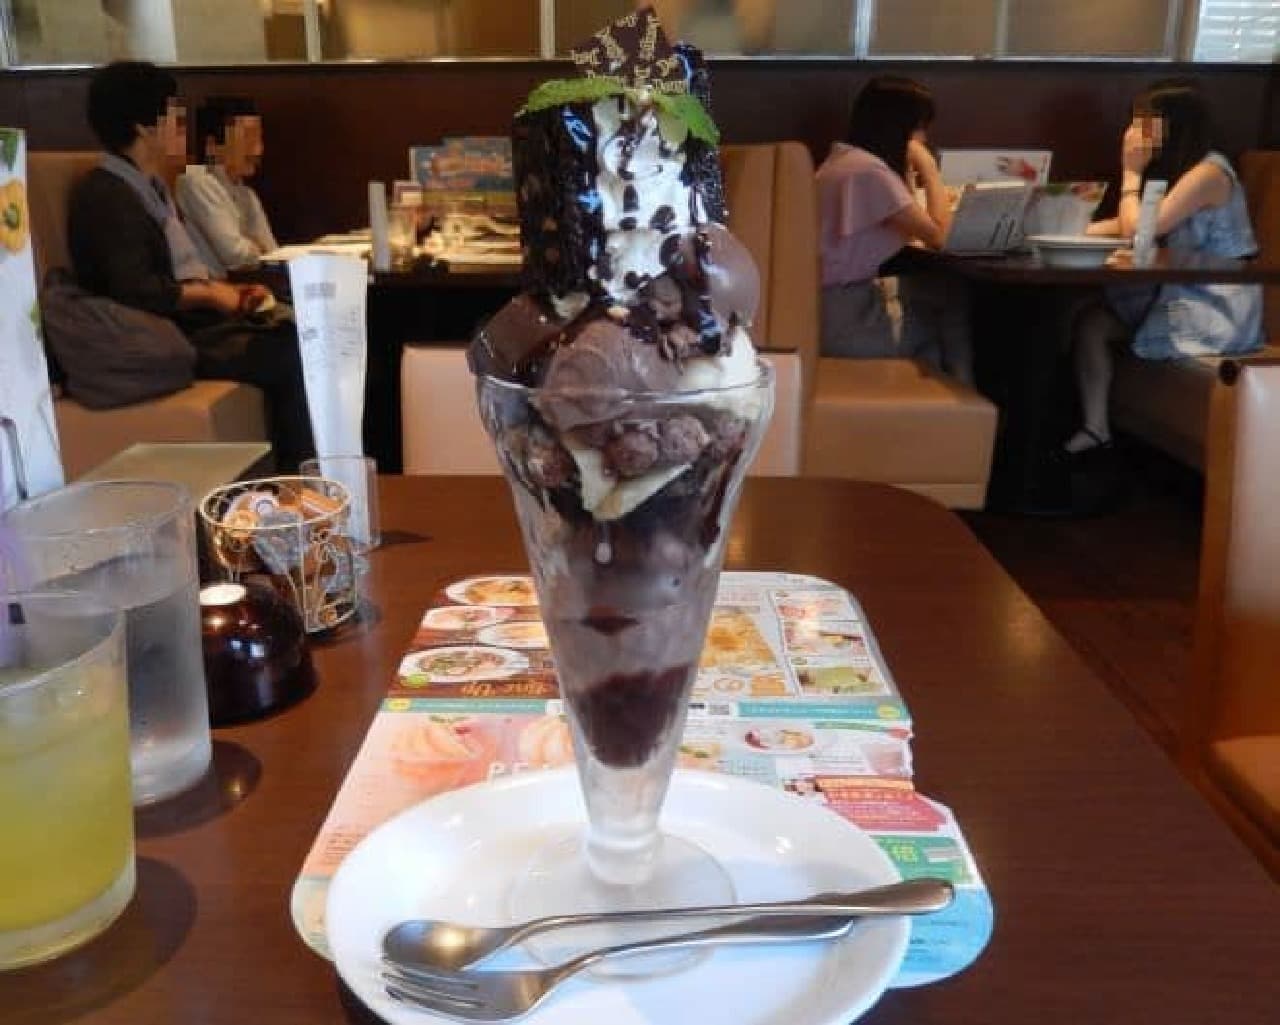 Compare eating "chocolate parfait" of family restaurant chain